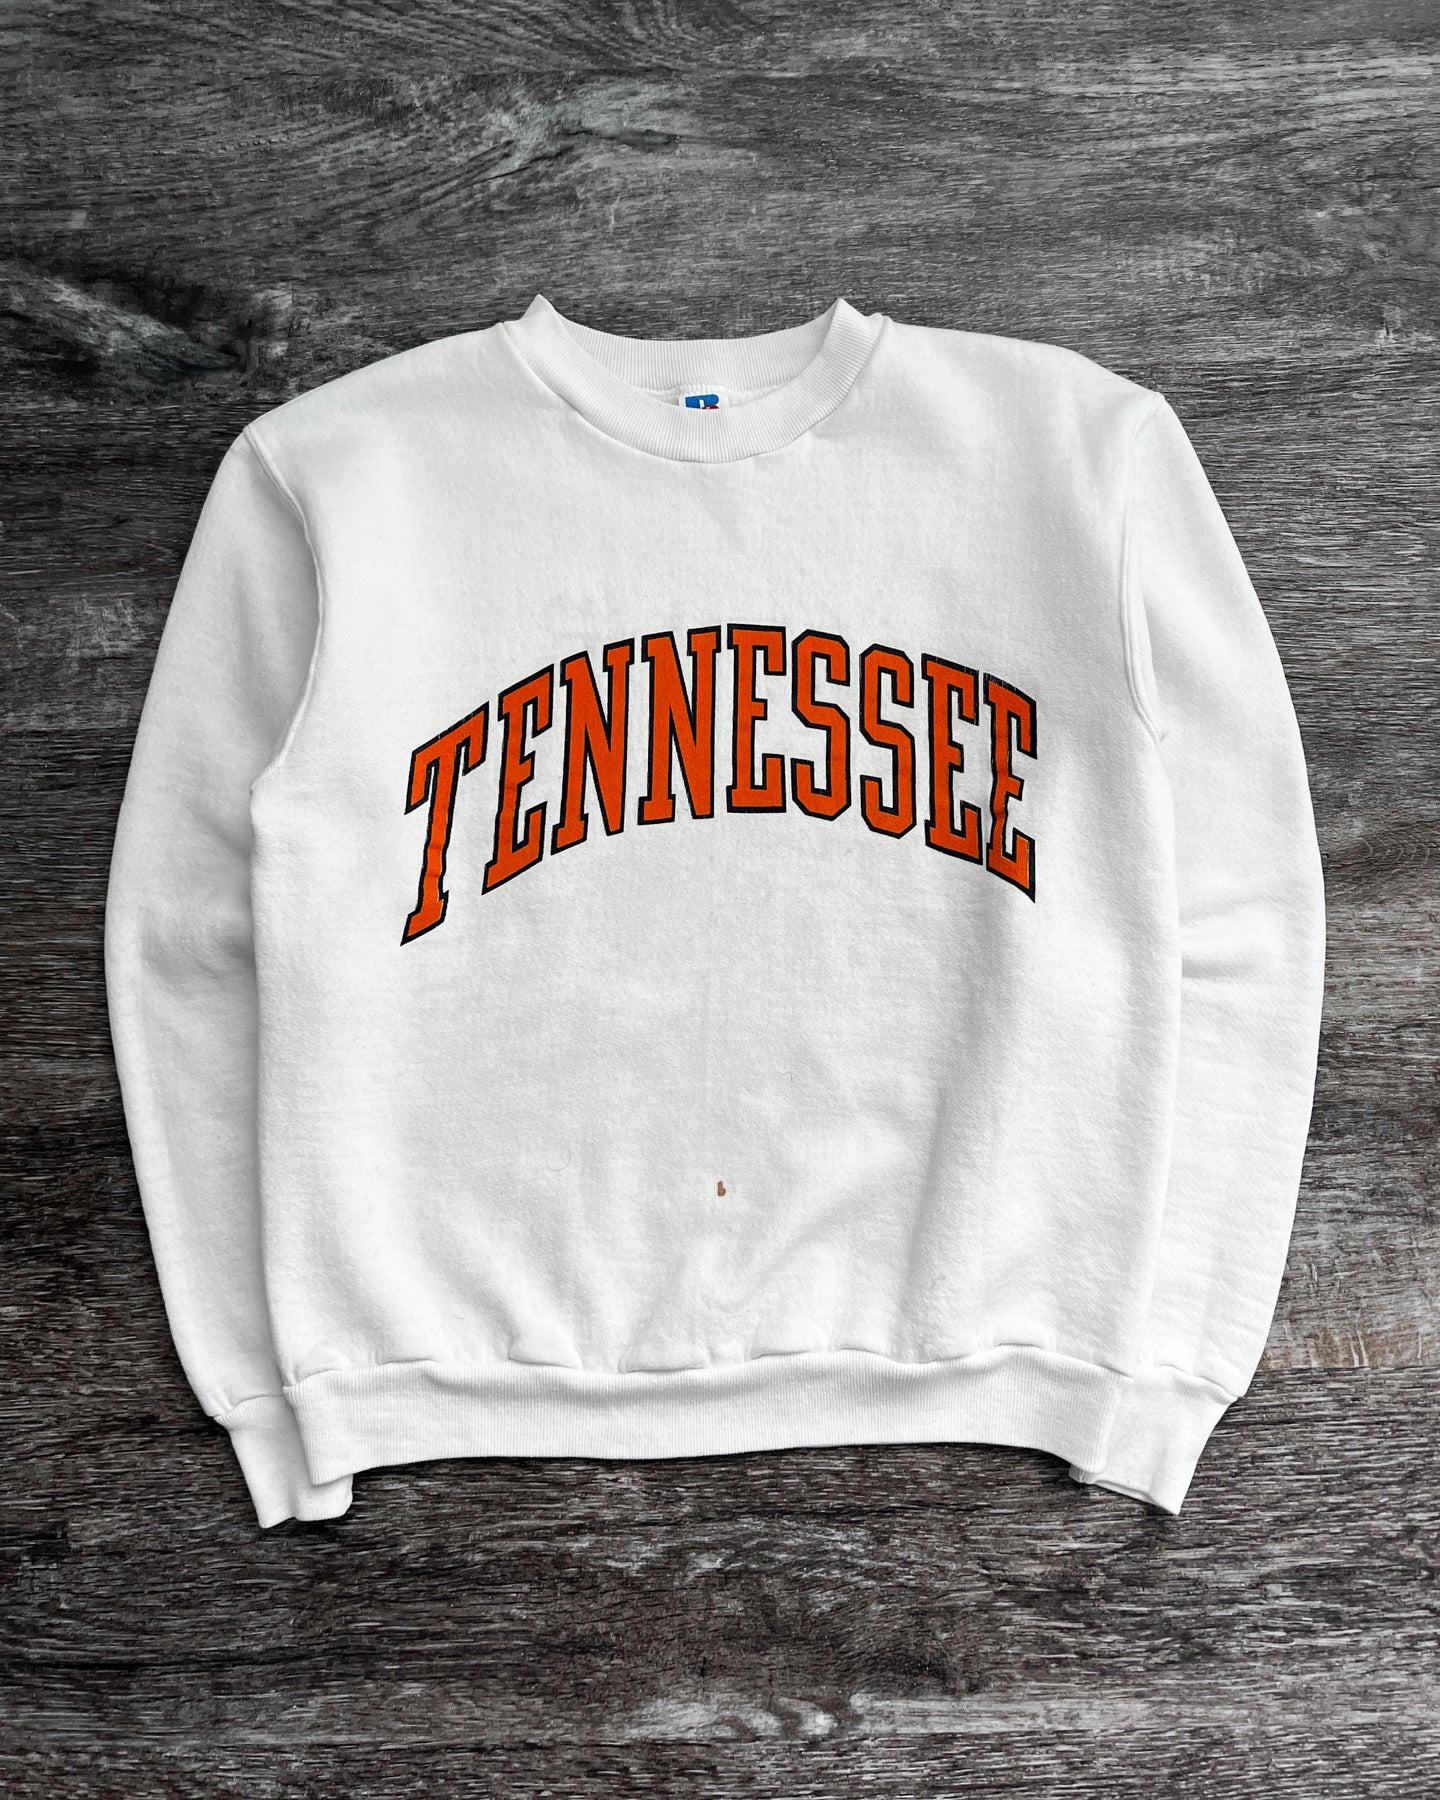 1980s Russell Athletic Tennessee Crewneck - Size Medium